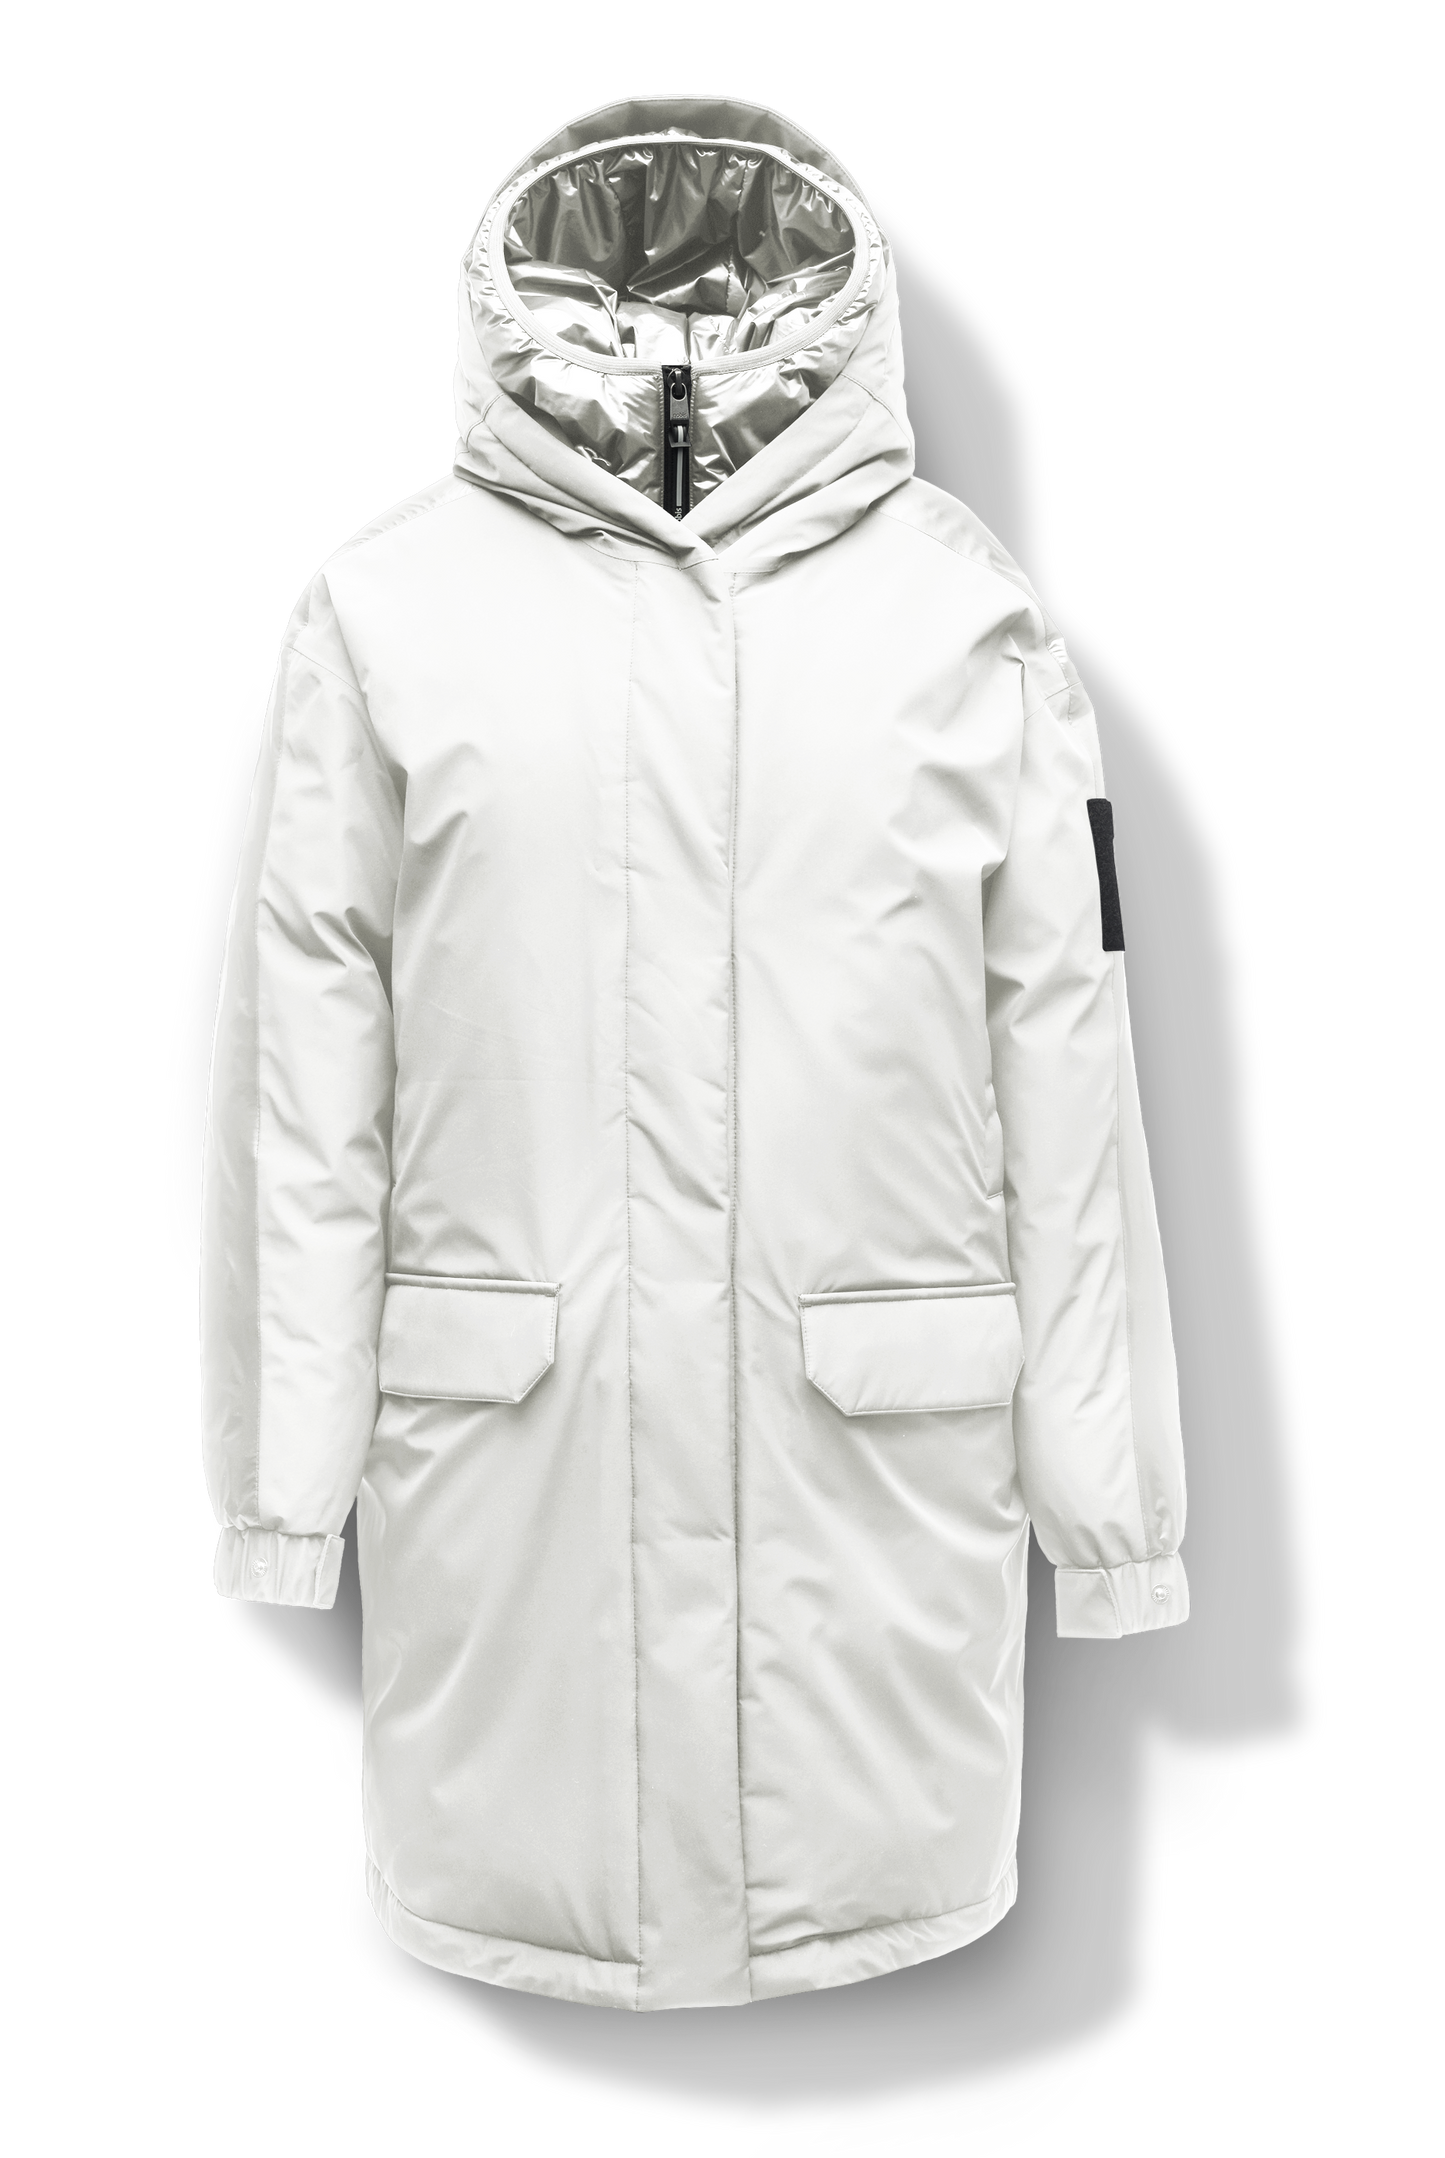 Slyn Women's Performance Parka in thigh length, premium 3-ply micro denier and cire technical nylon taffeta fabrication, Premium Canadian origin White Duck Down insulation, non-removable down-filled hood, inner hooded gilet, two-way centre-front zipper with magnetic closure wind flap, fleece-lined pockets at chest and waist, pit zipper vents, in Chalk